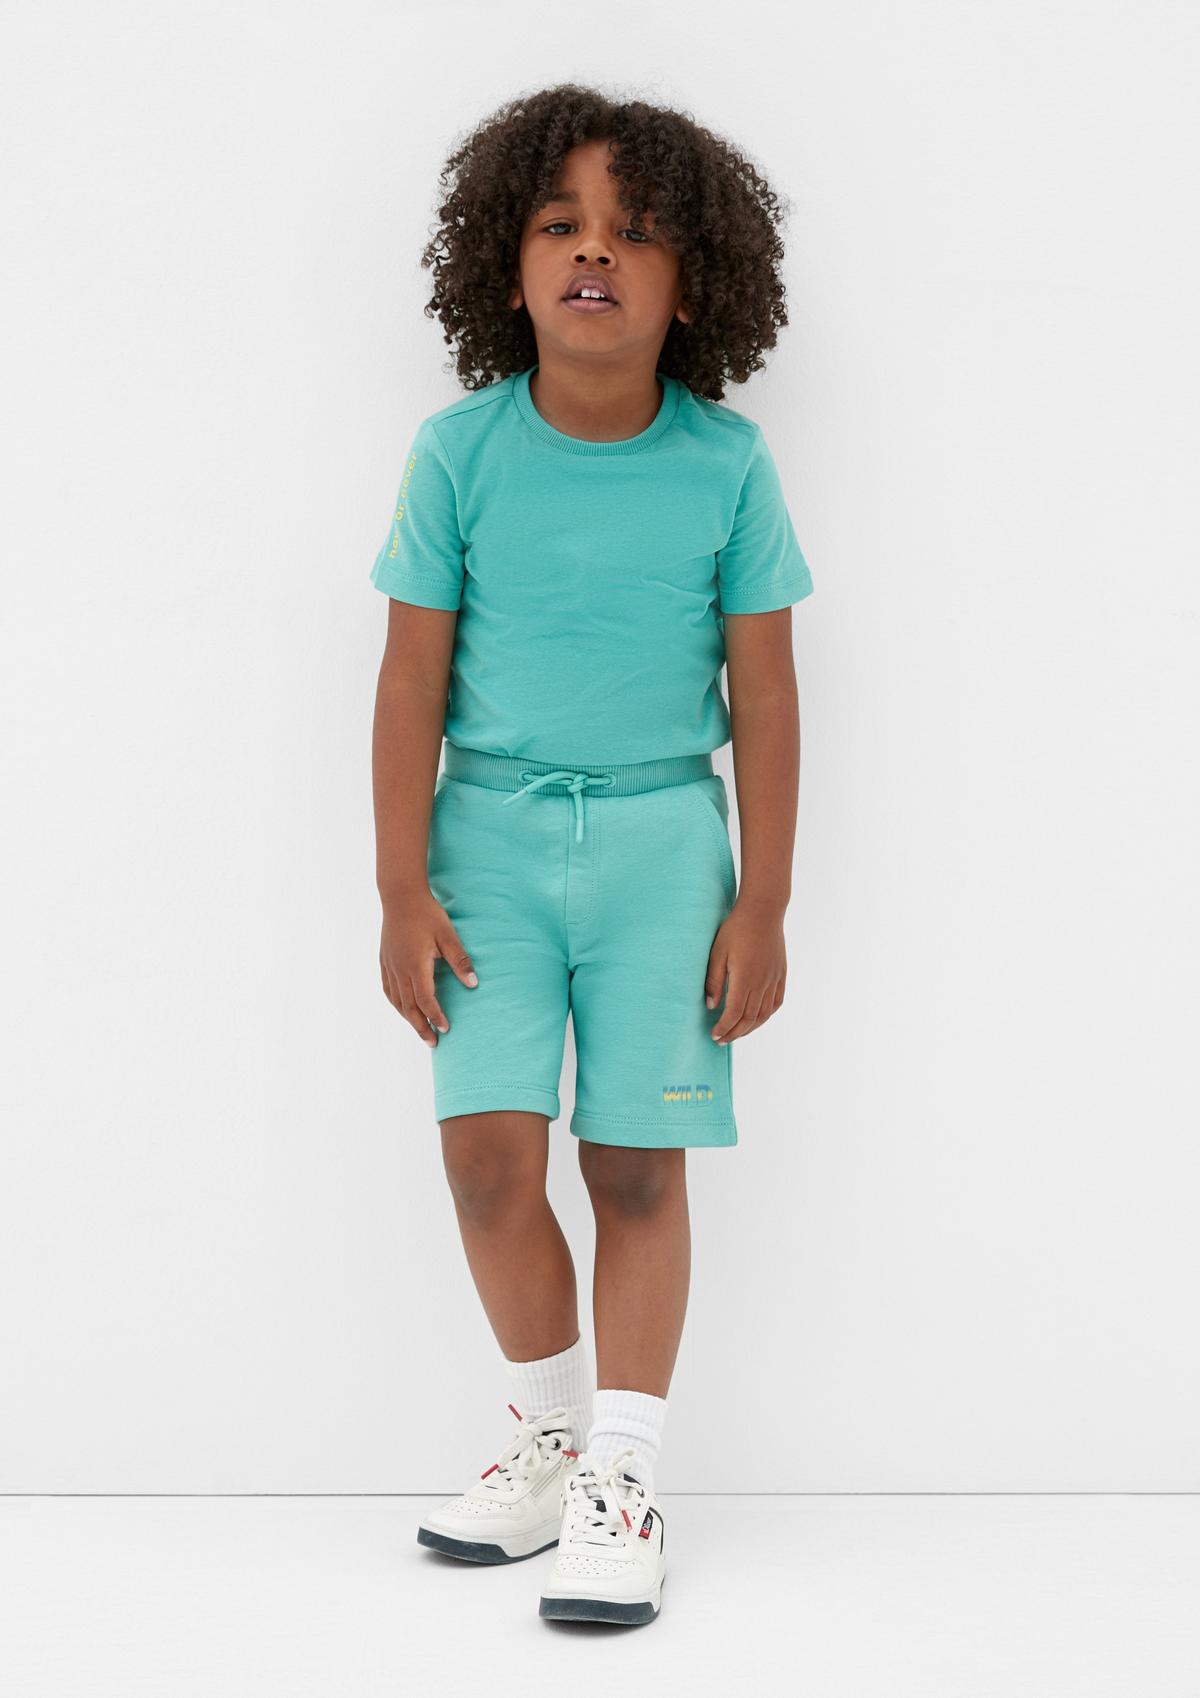 for Find teens and online Bermuda boys shorts